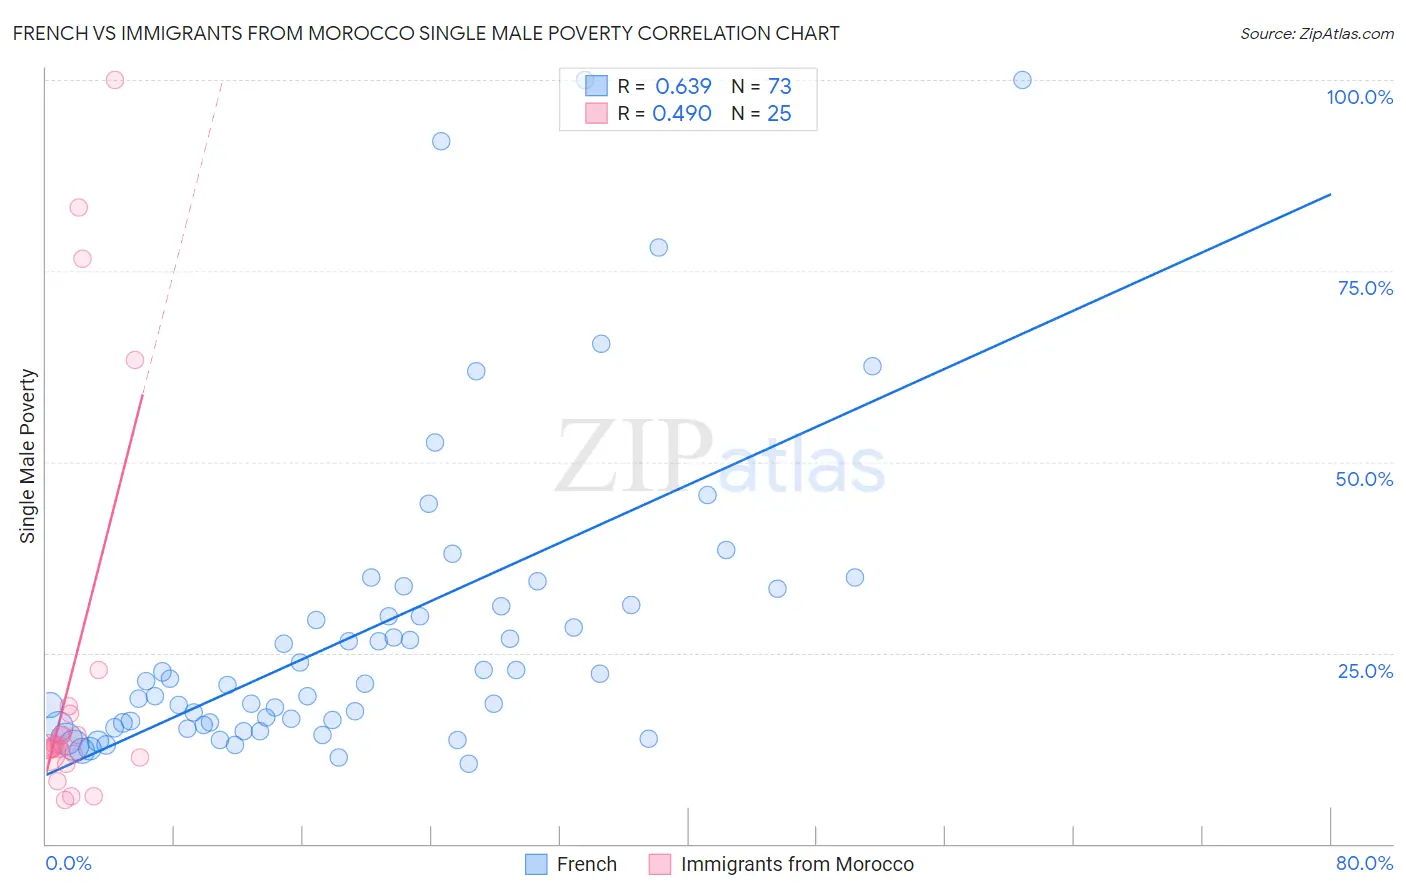 French vs Immigrants from Morocco Single Male Poverty